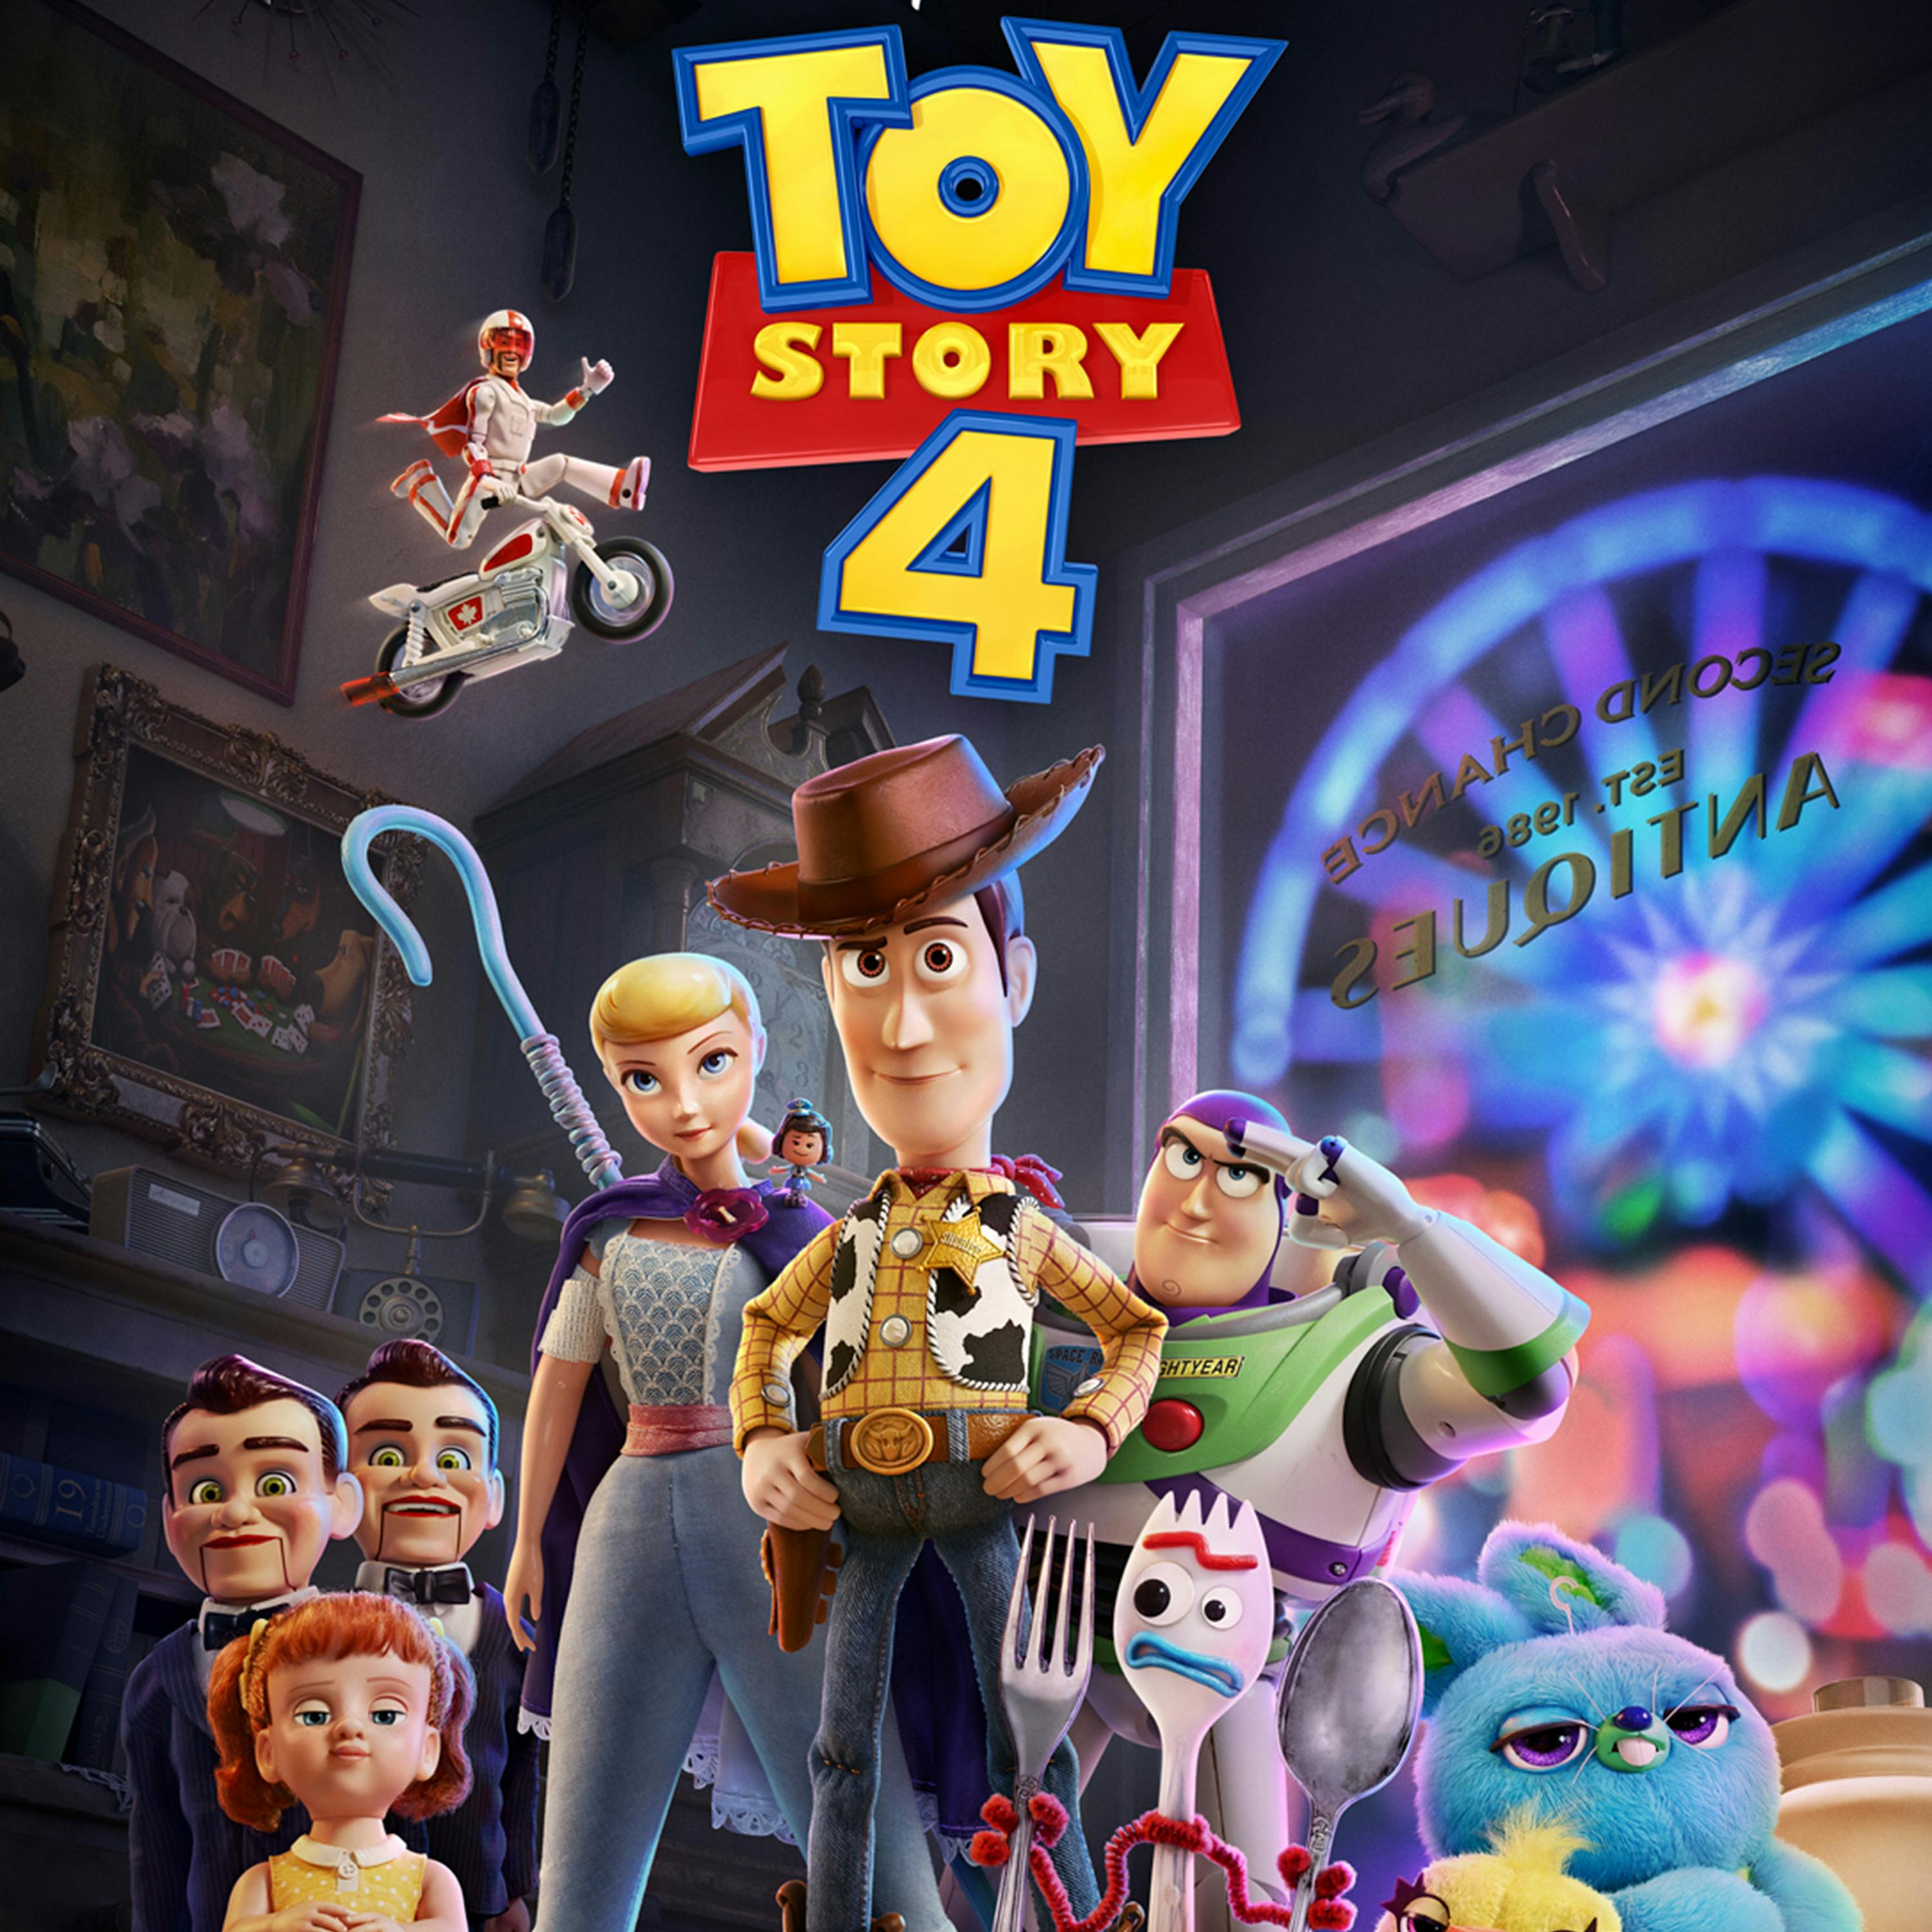 Episode 161 - Toy Story 4